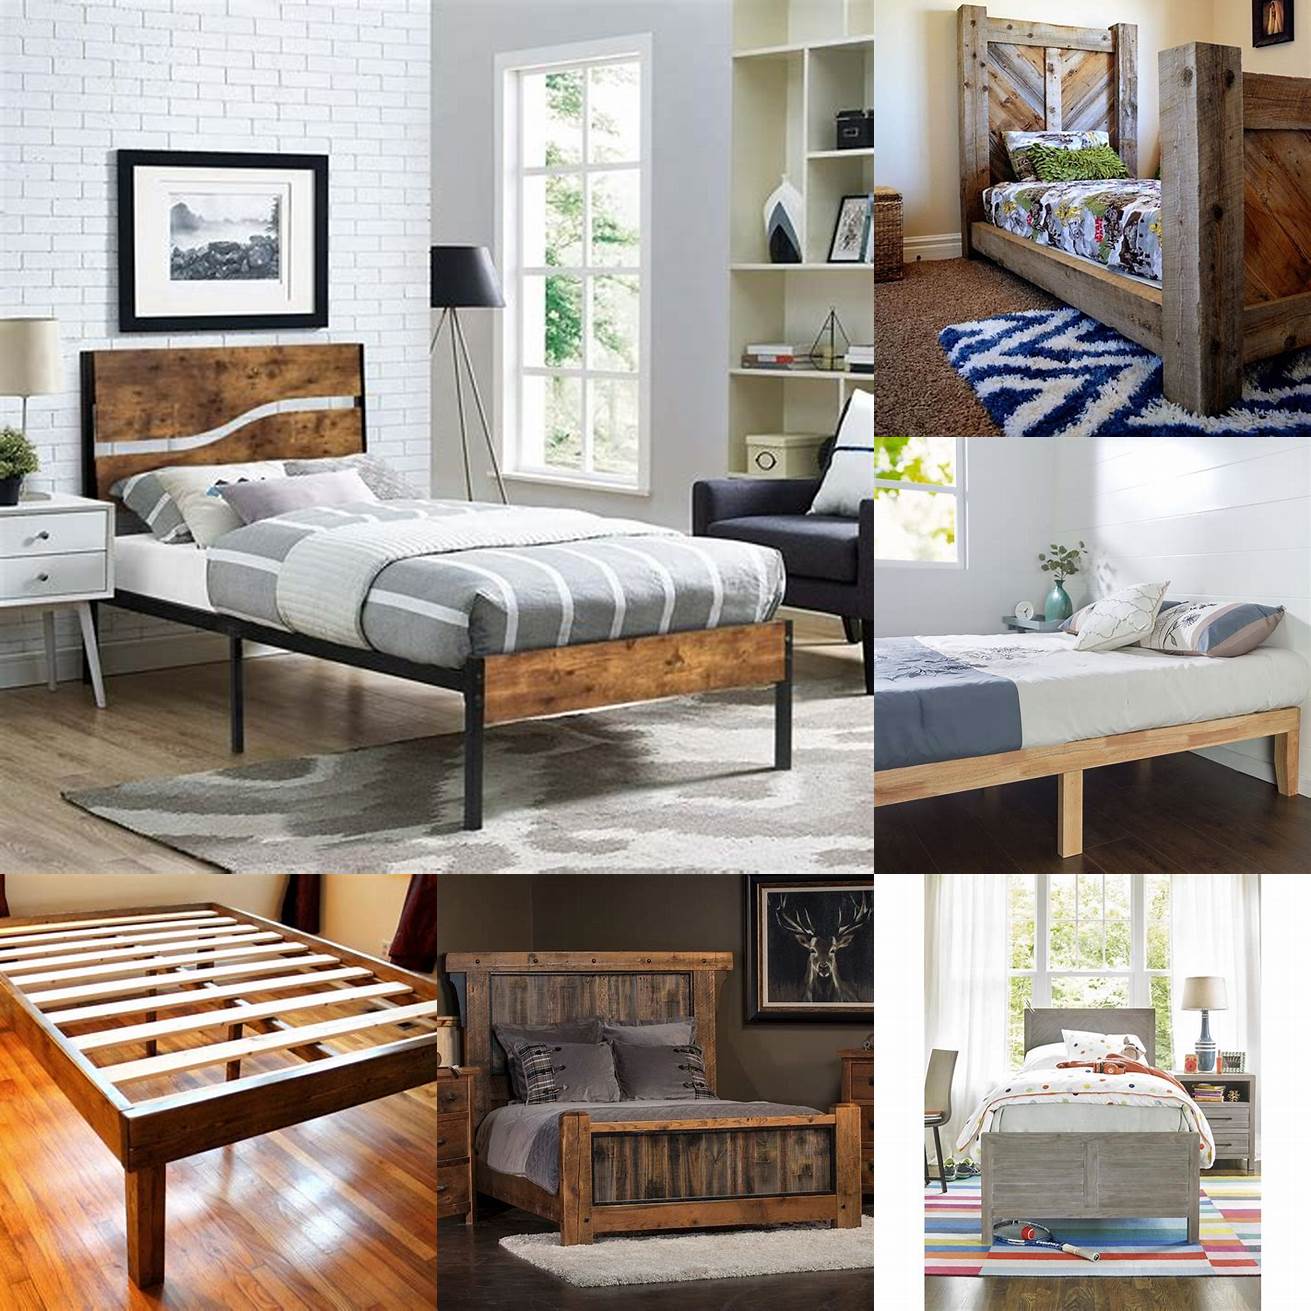 A rustic Wood Twin Bed Frame